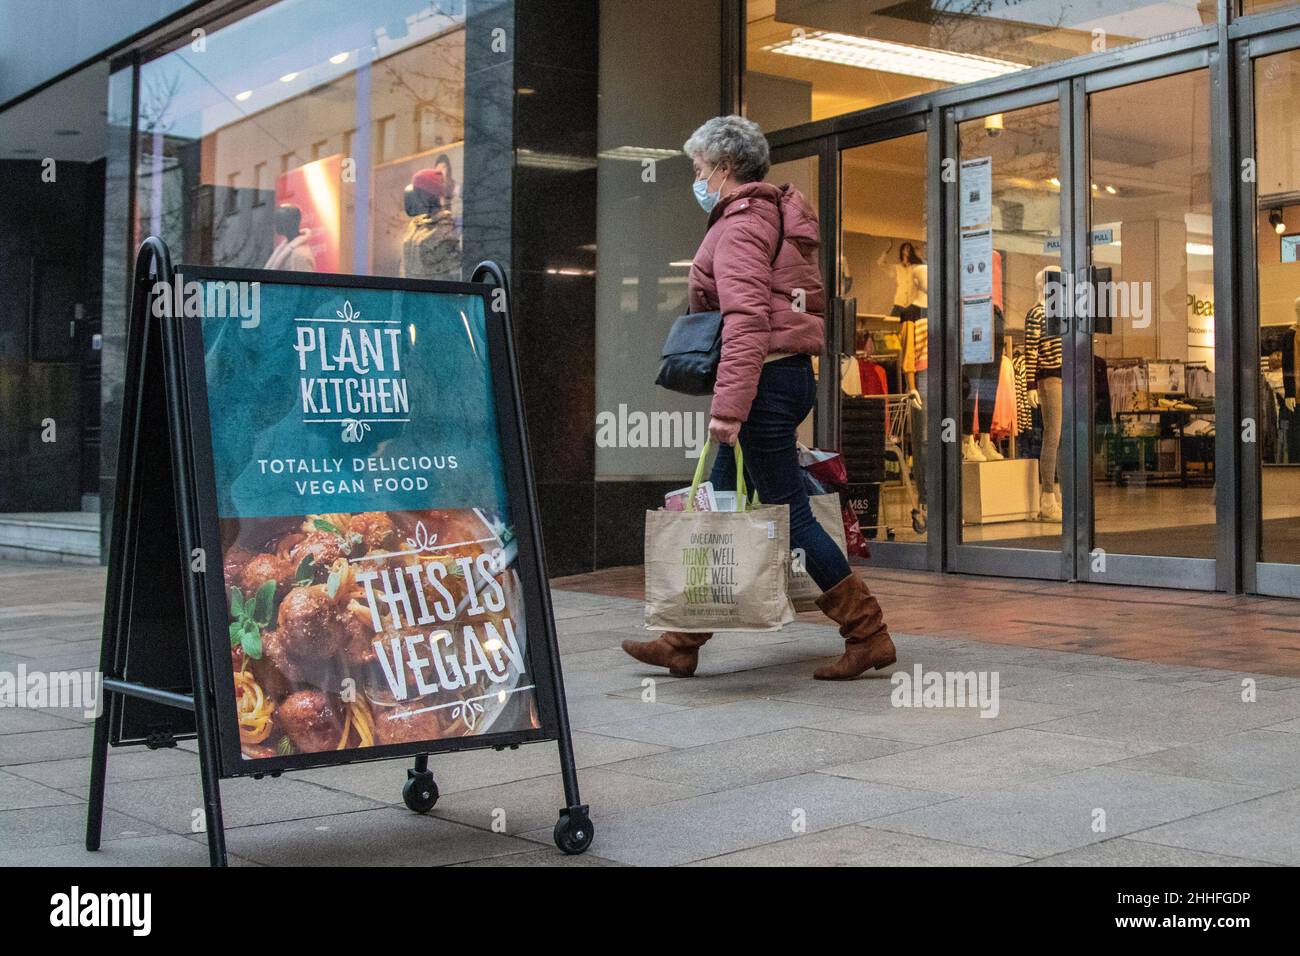 M&S Marks and Spencer Food Hall A board pavement sign advertising vegan foods. Shops shoppers shopping in Preston, UK Stock Photo